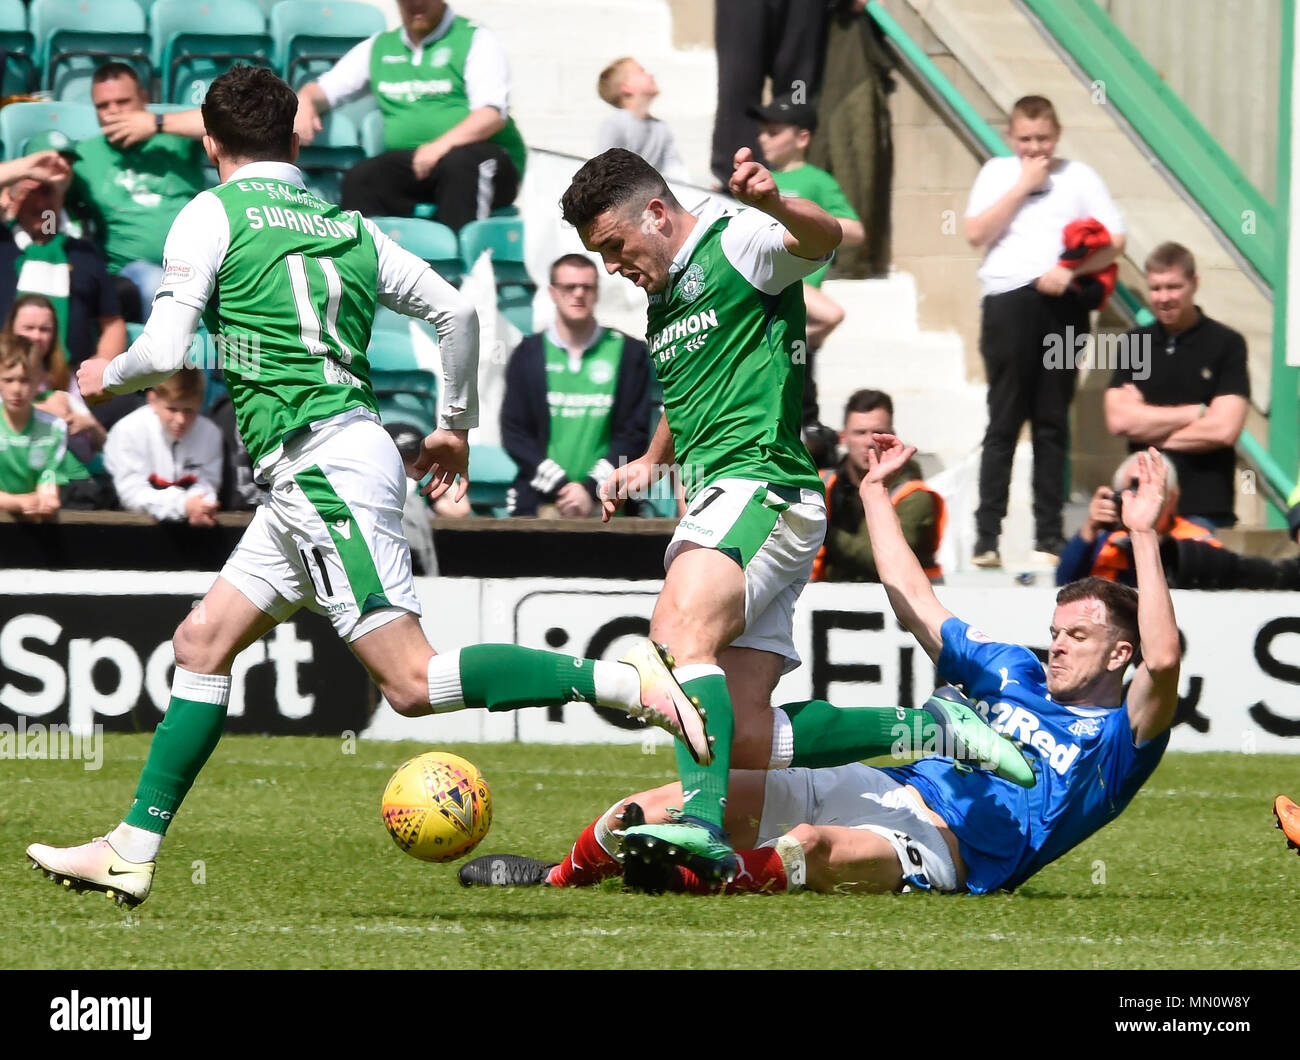 Hibernian's  John McGinn is brought down by Rangers Andy Halliday during the Ladbrokes Scottish Premiership match at Easter Road, Edinburgh. PRESS ASSOCIATION Photo. Picture date: Sunday May 13, 2018. See PA story SOCCER Hibernian. Photo credit should read: Ian Rutherford PA Wire. RESTRICTIONS: EDITORIAL USE ONLY Stock Photo